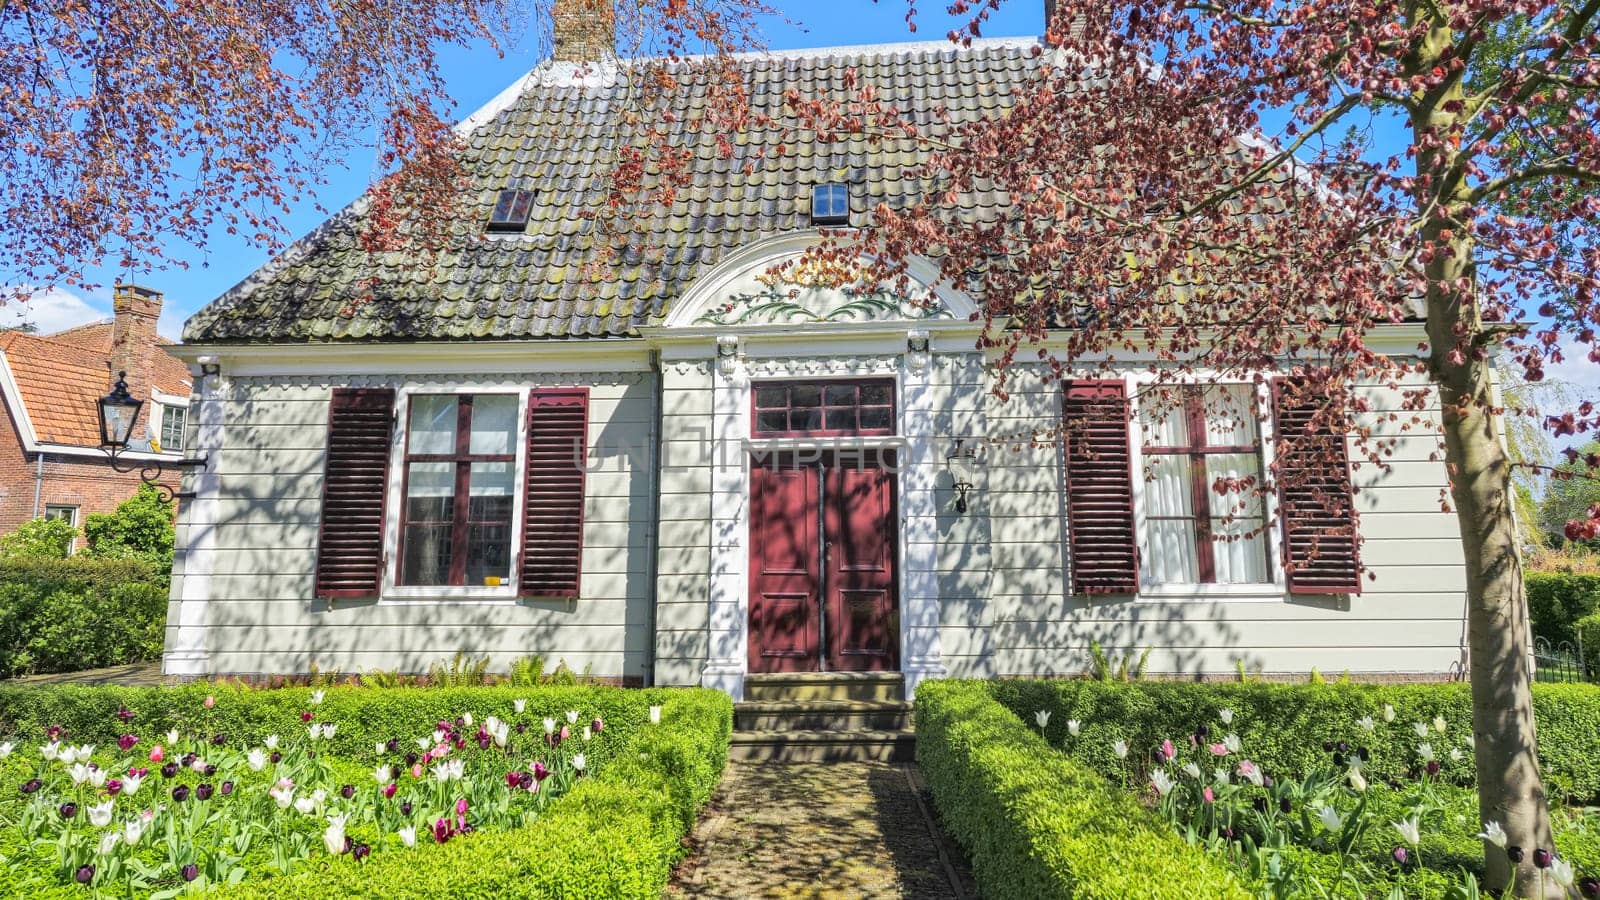 Broek in Waterlands Netherlands 21 April 2024, A charming white house adorned with vibrant red shutters and an inviting red door, standing out against a backdrop of greenery.